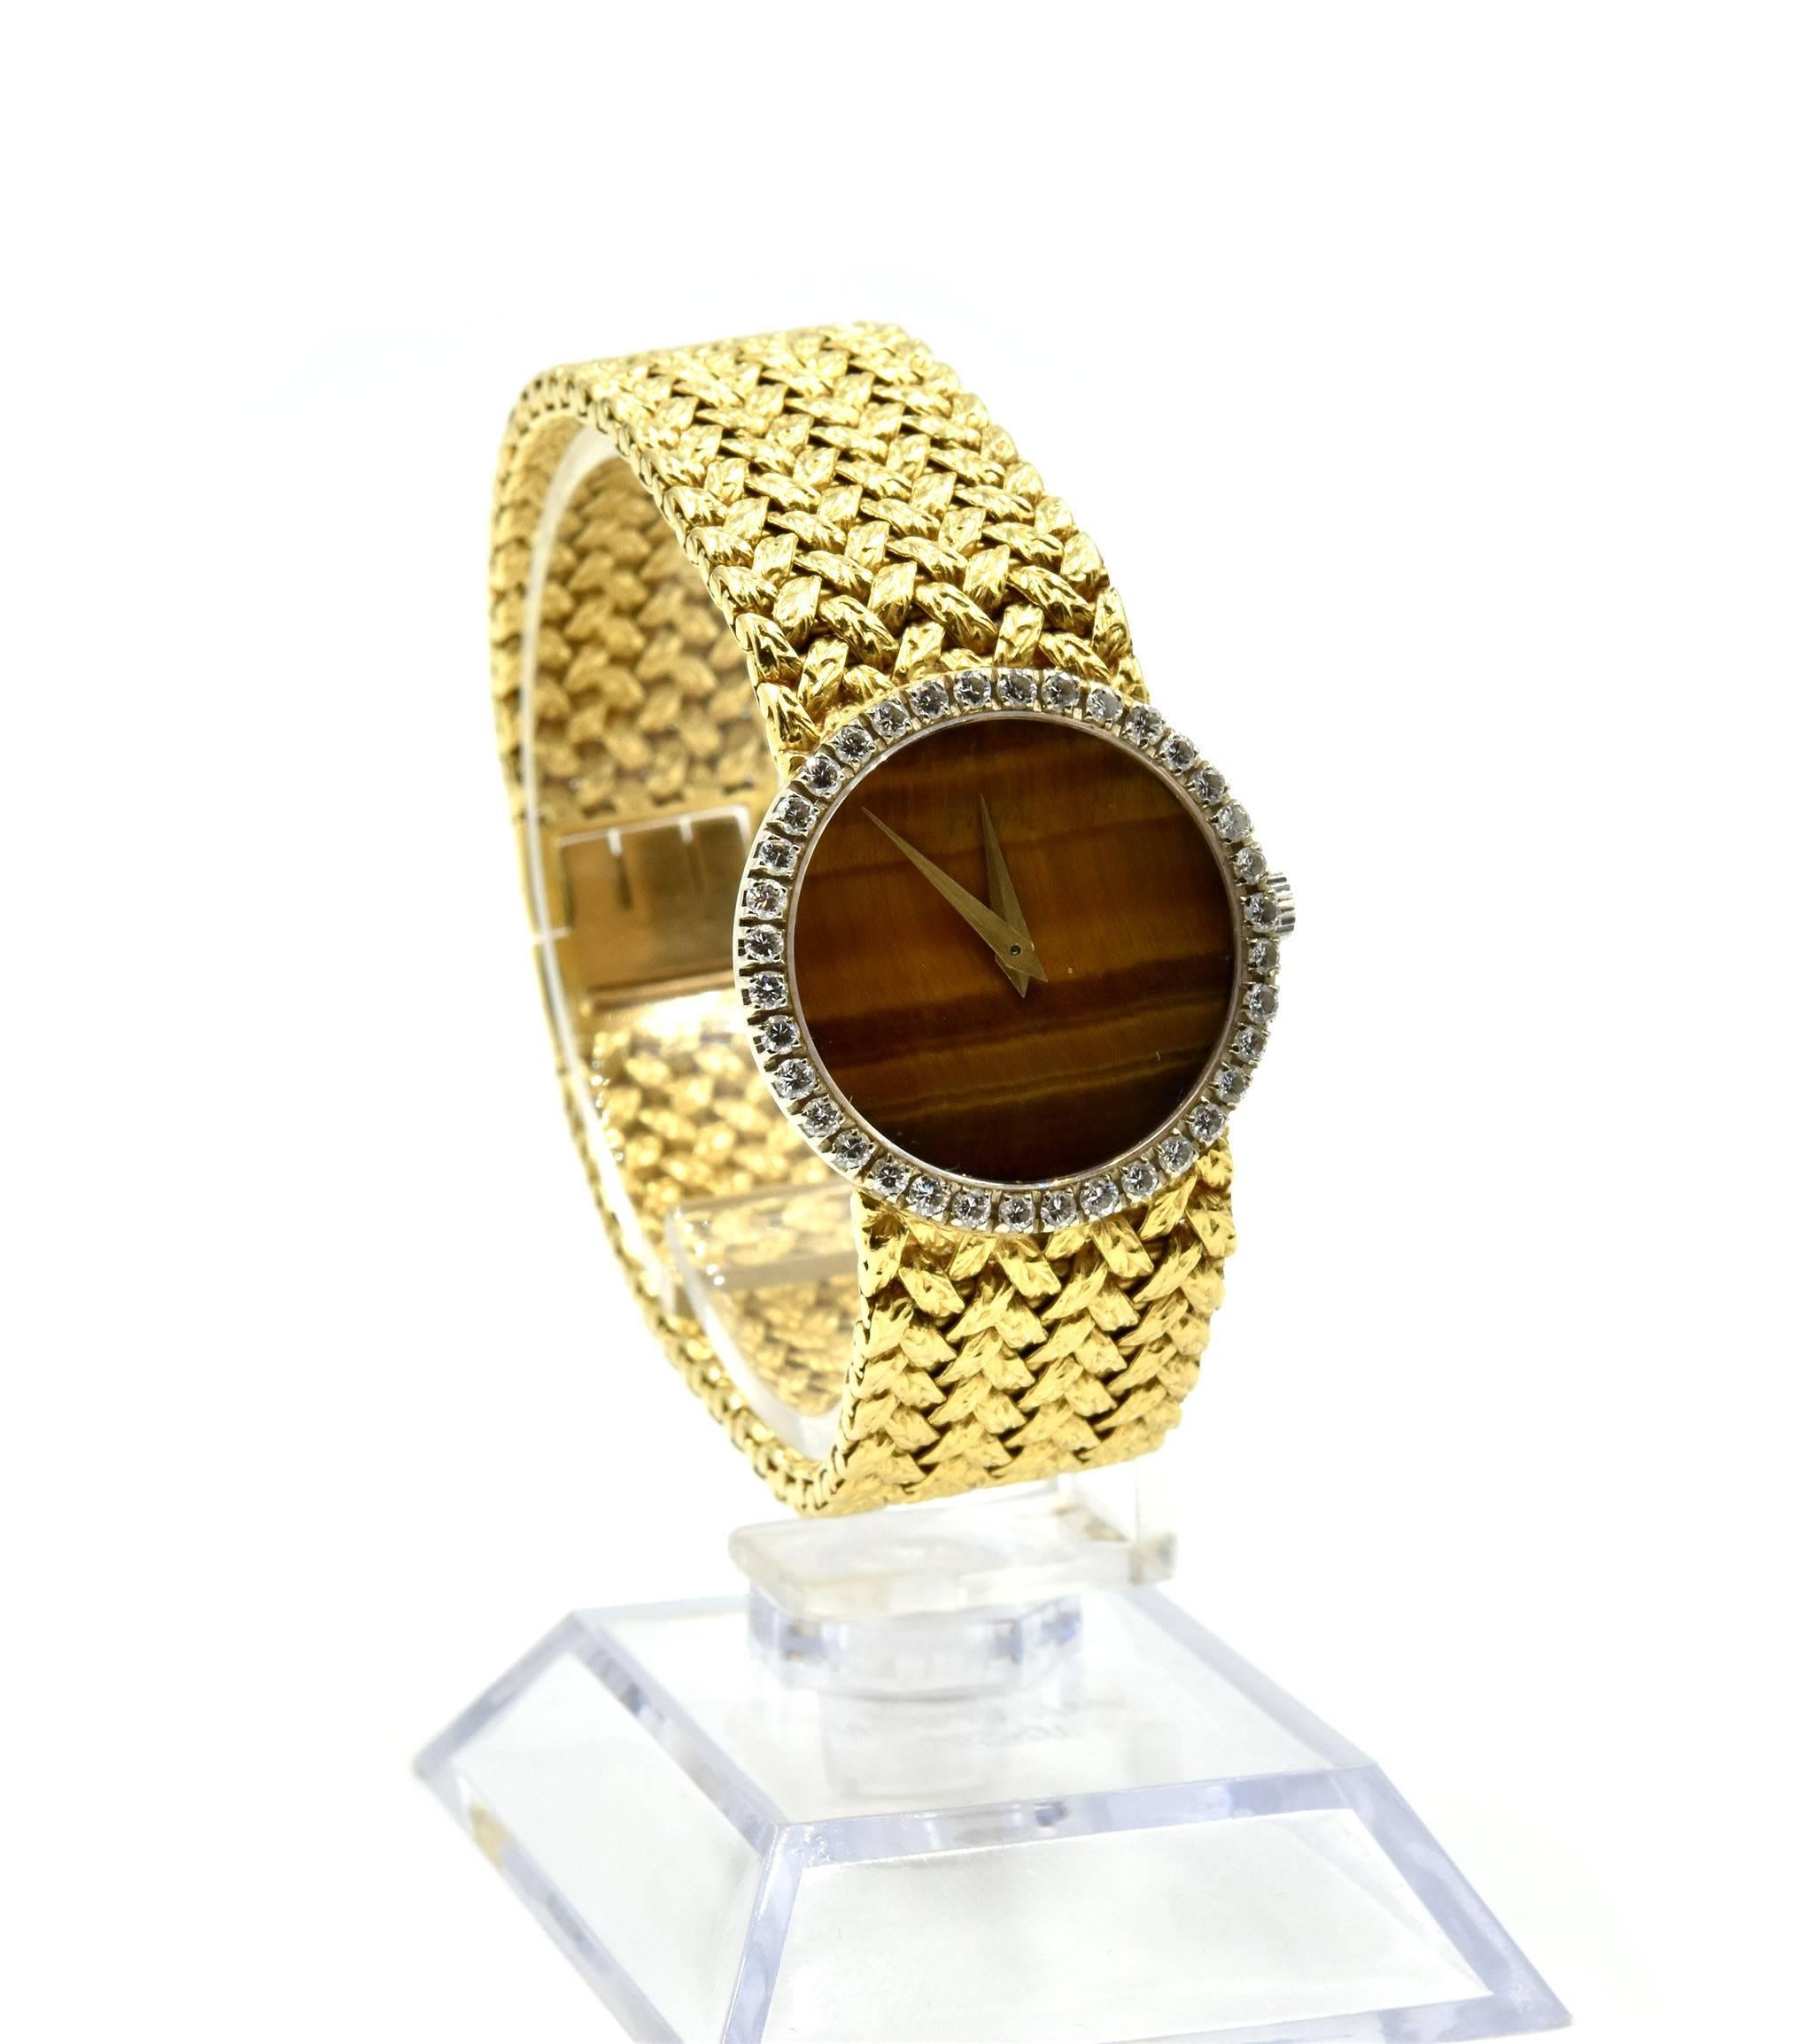 Movement: mechanical
Function: hours, minutes
Case: round 24mm 18k yellow gold case with diamond bezel, plastic protective crystal, winding crown
Diamonds: 36 round brilliant cuts = 1.00 carat total weight
Dial: tigers eye dial with gold hands
Band: